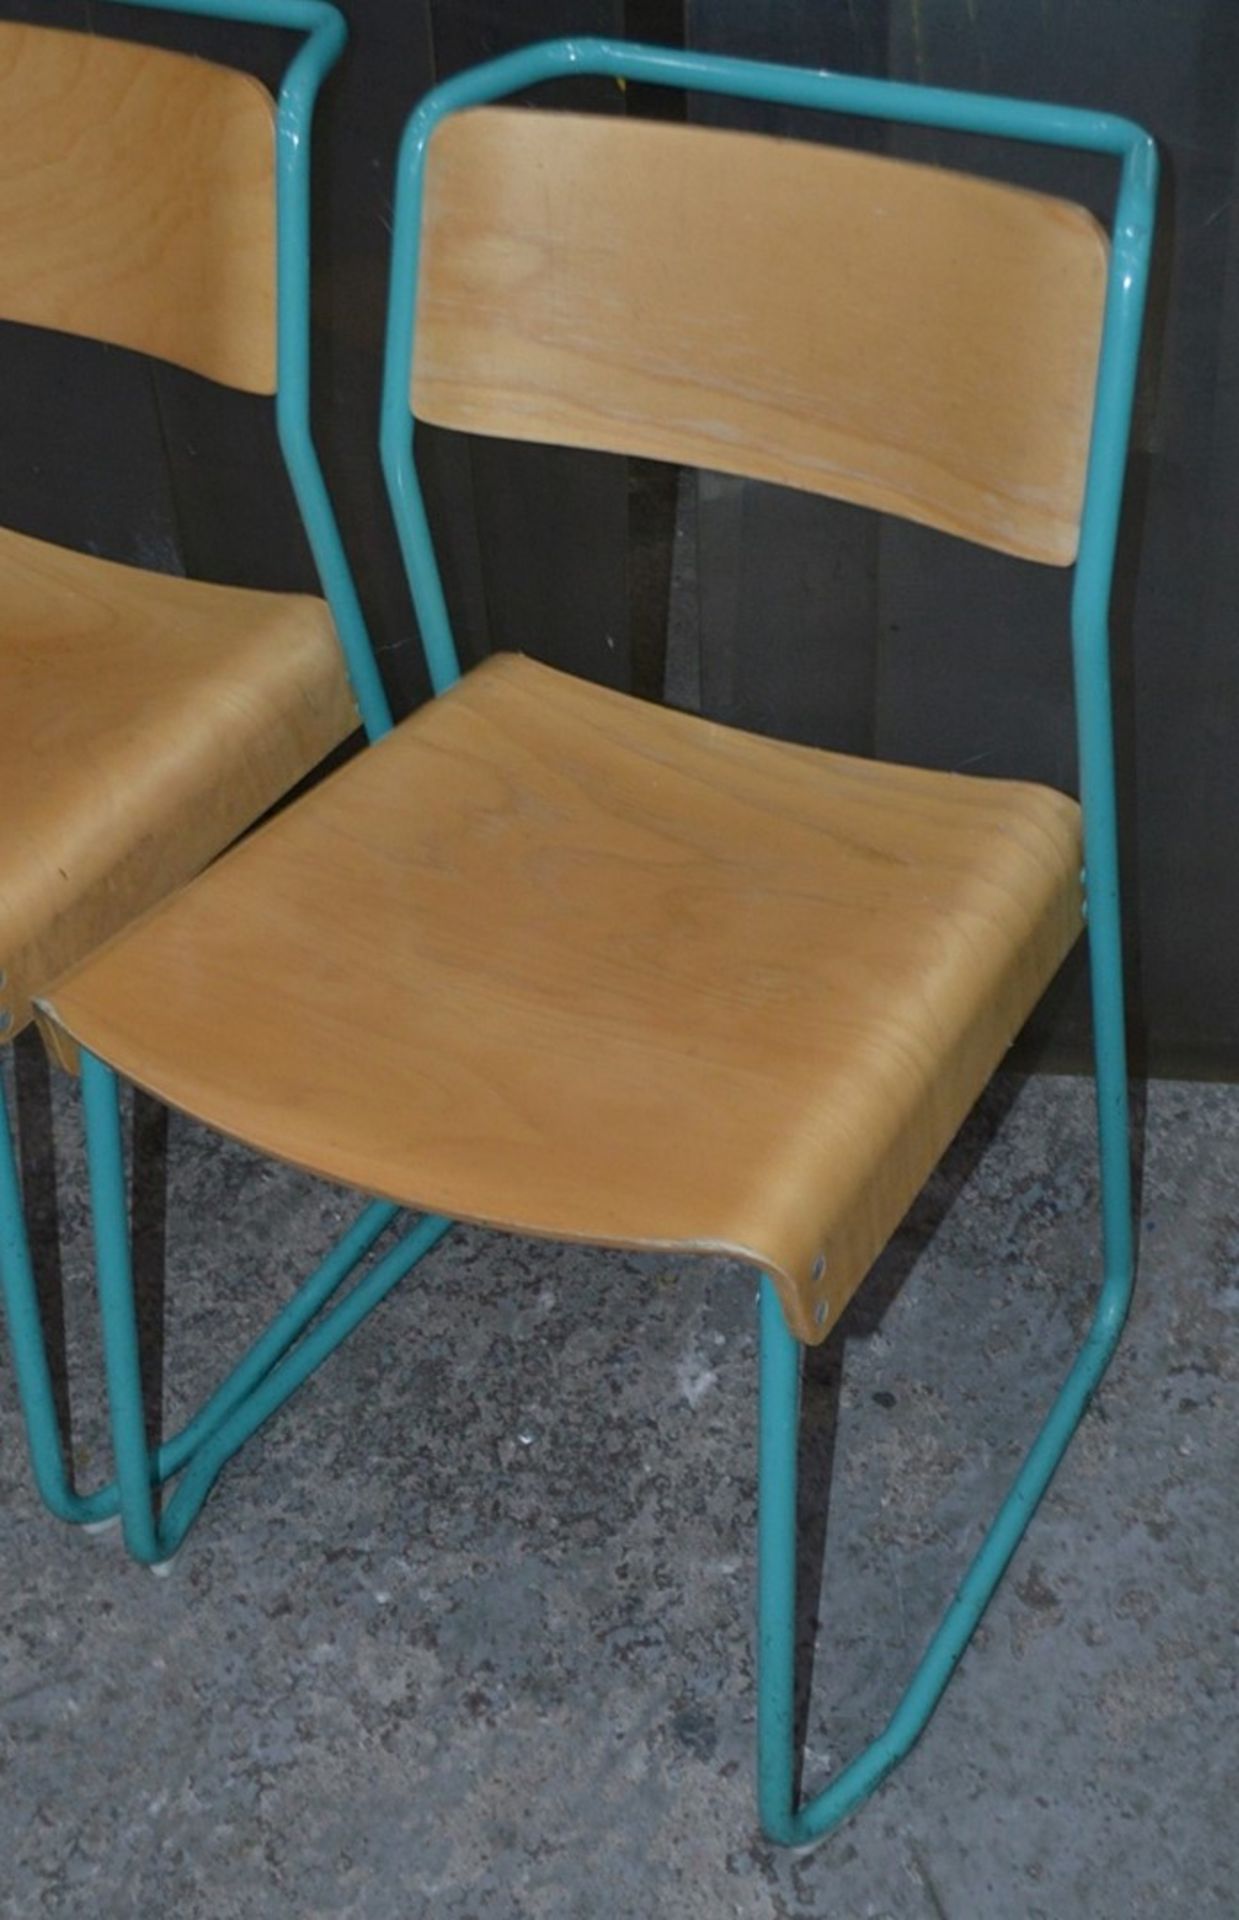 6 x Contemporary Stackable Bistro / Bar Chairs With Metal Frames With Curved Vanished Wooden Seats - Image 5 of 12